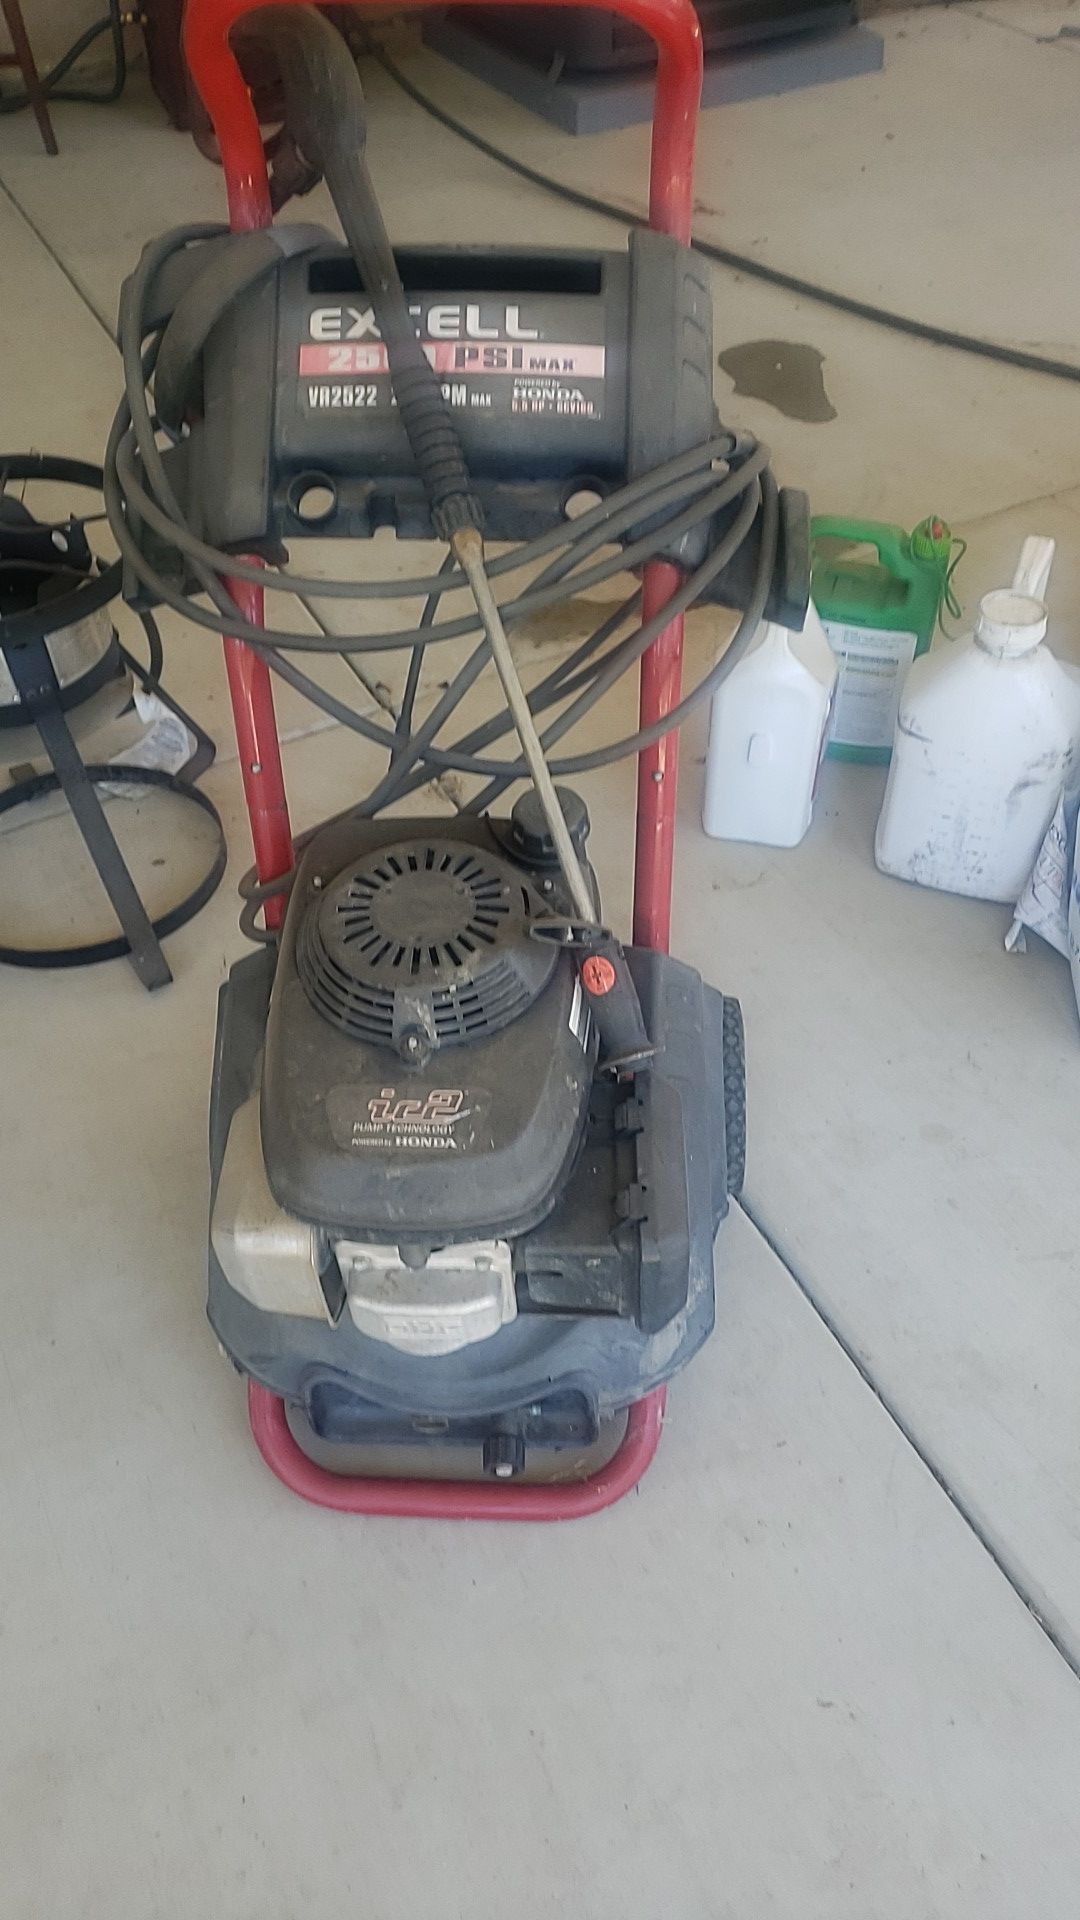 Excell Pressure washer. HONDA Engine